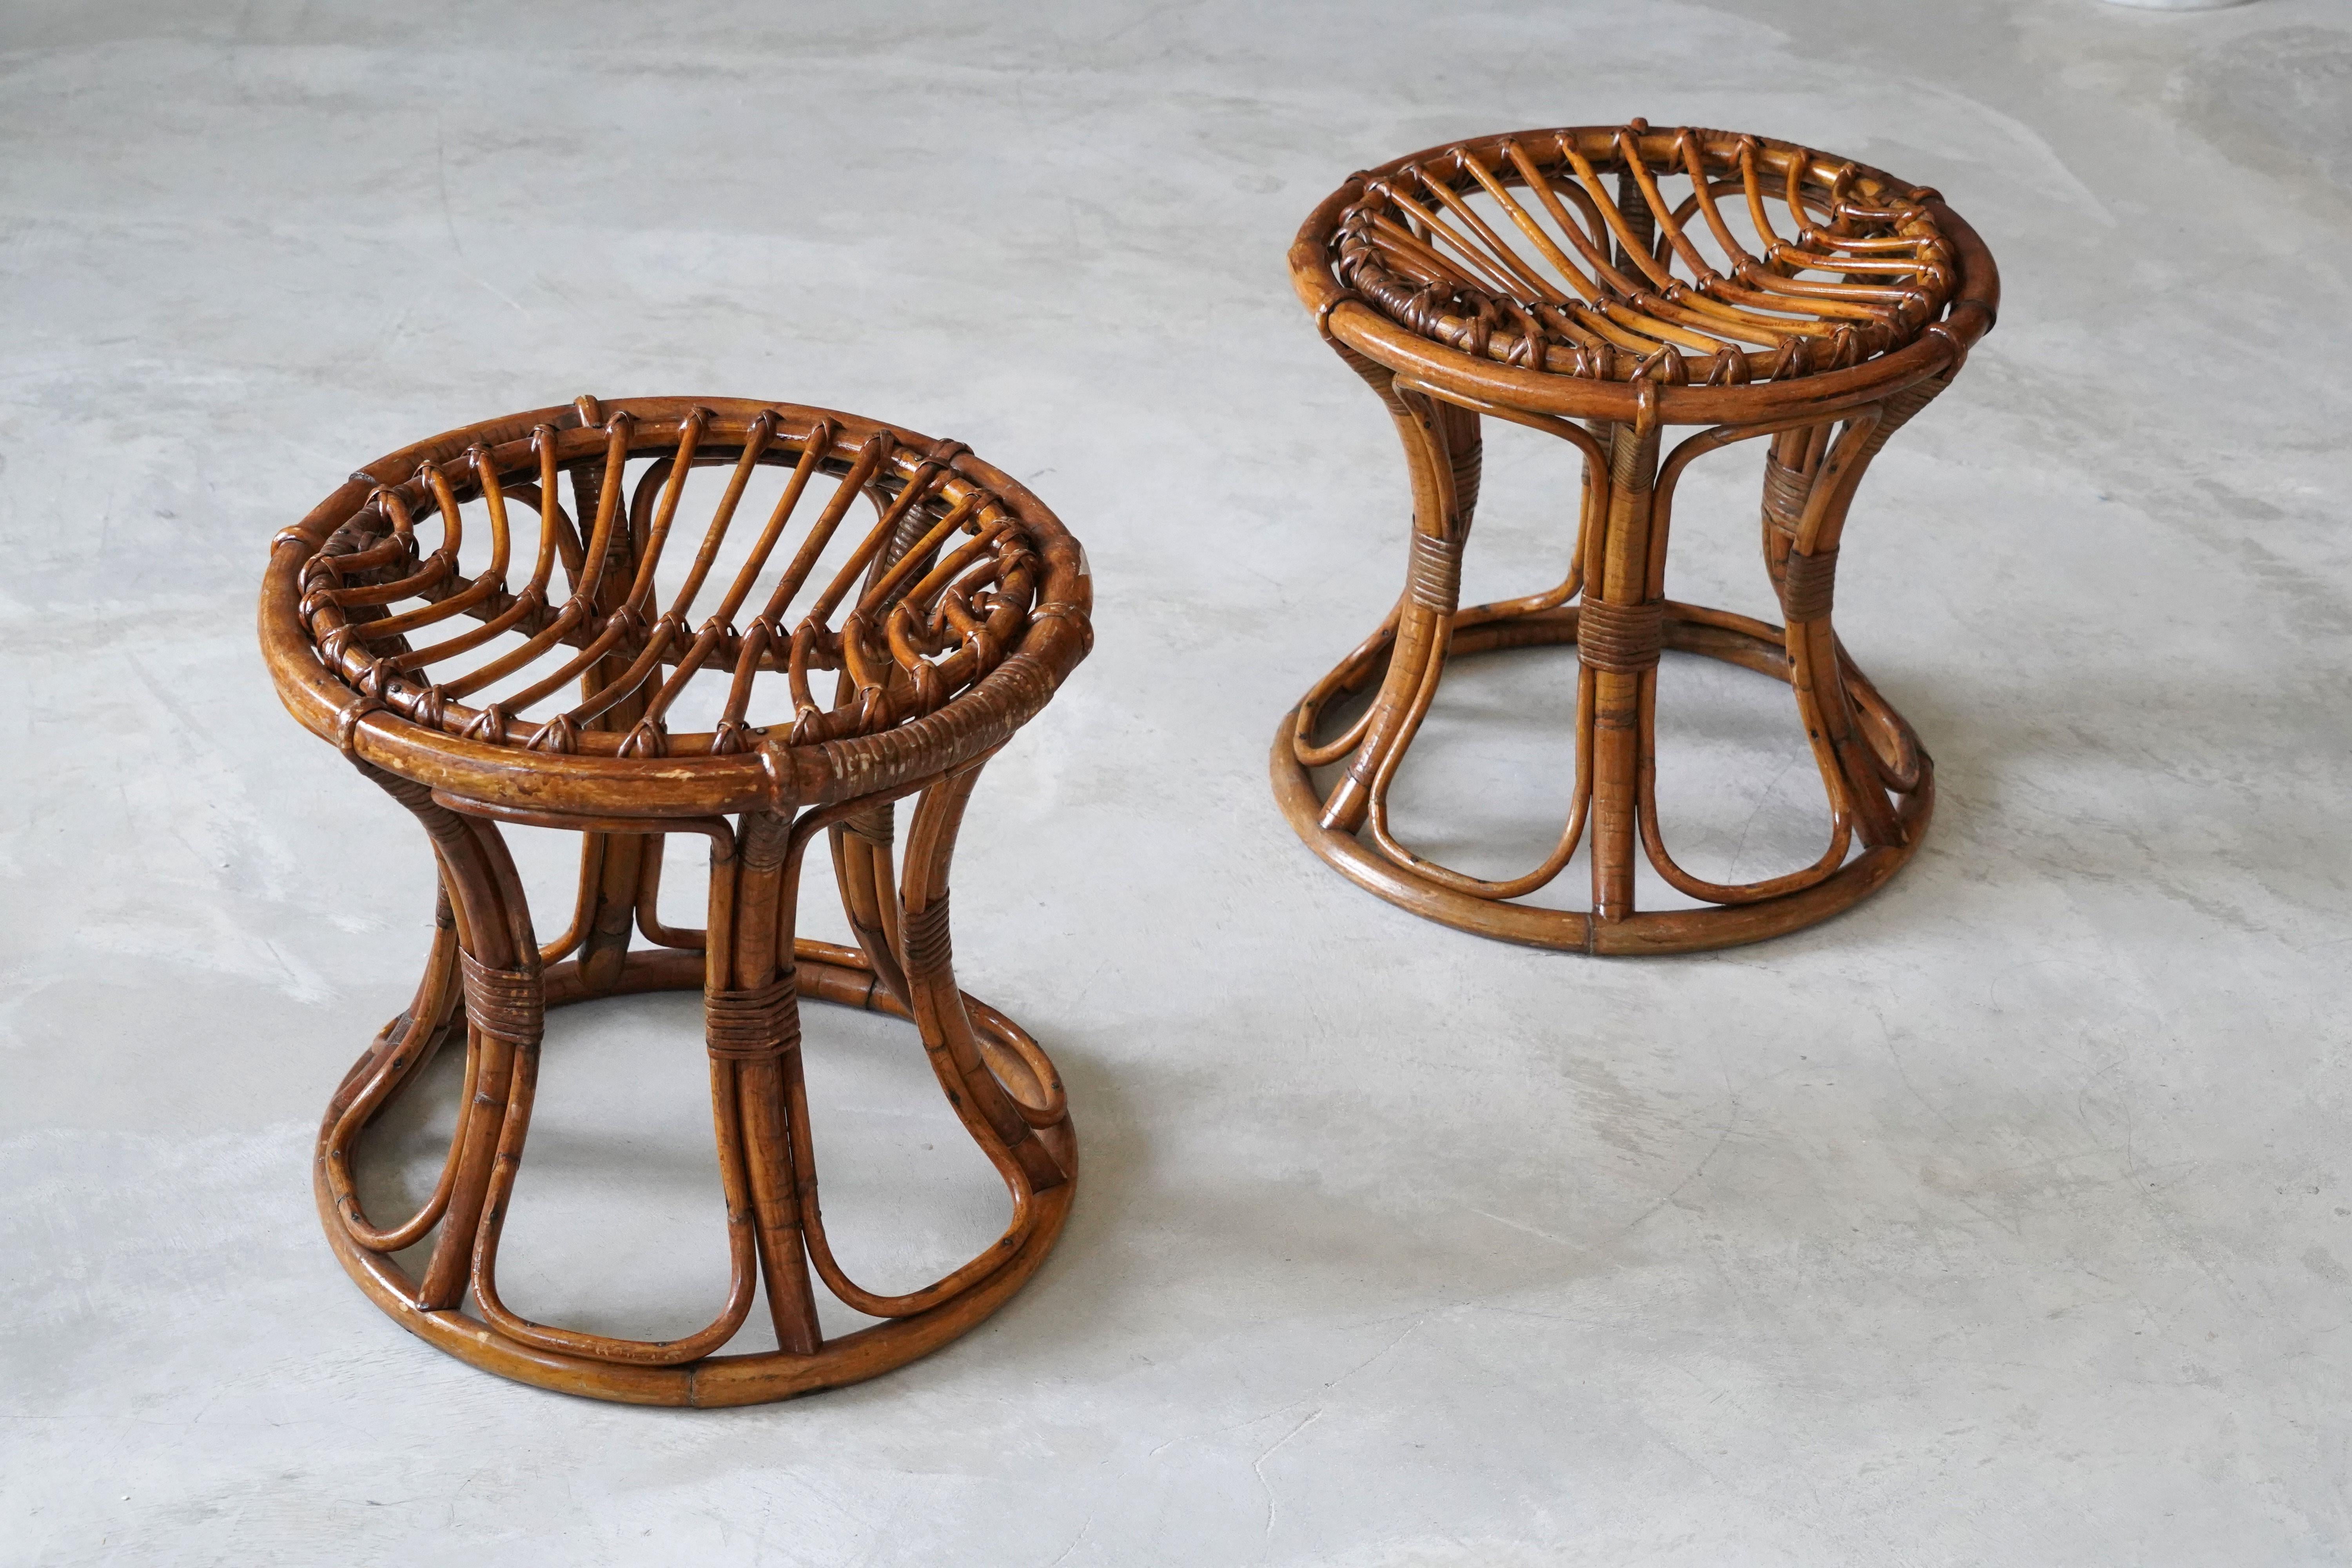 A pair of stools. Designed and produced in Italy, 1950-1960s. 

Other designers of the period include Gabriella Crespi, Paul Frankl, Charlotte Perriand, Pierre Chapo and George Nakashima.